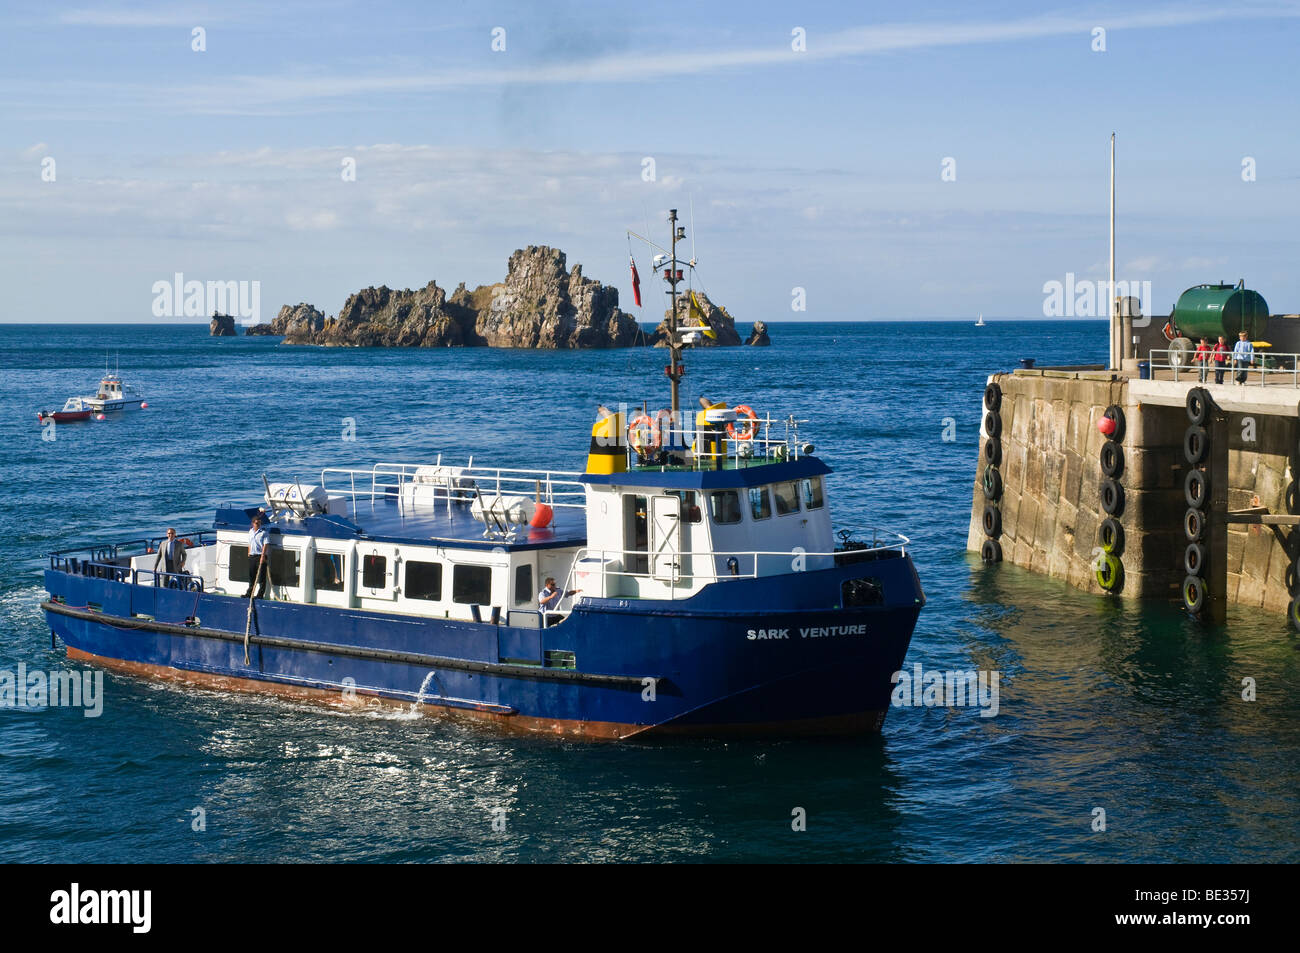 dh  MASELINE HARBOUR SARK ISLAND Isle of Sark shipping company ferry Sark Venture arriving from Guernsey Stock Photo